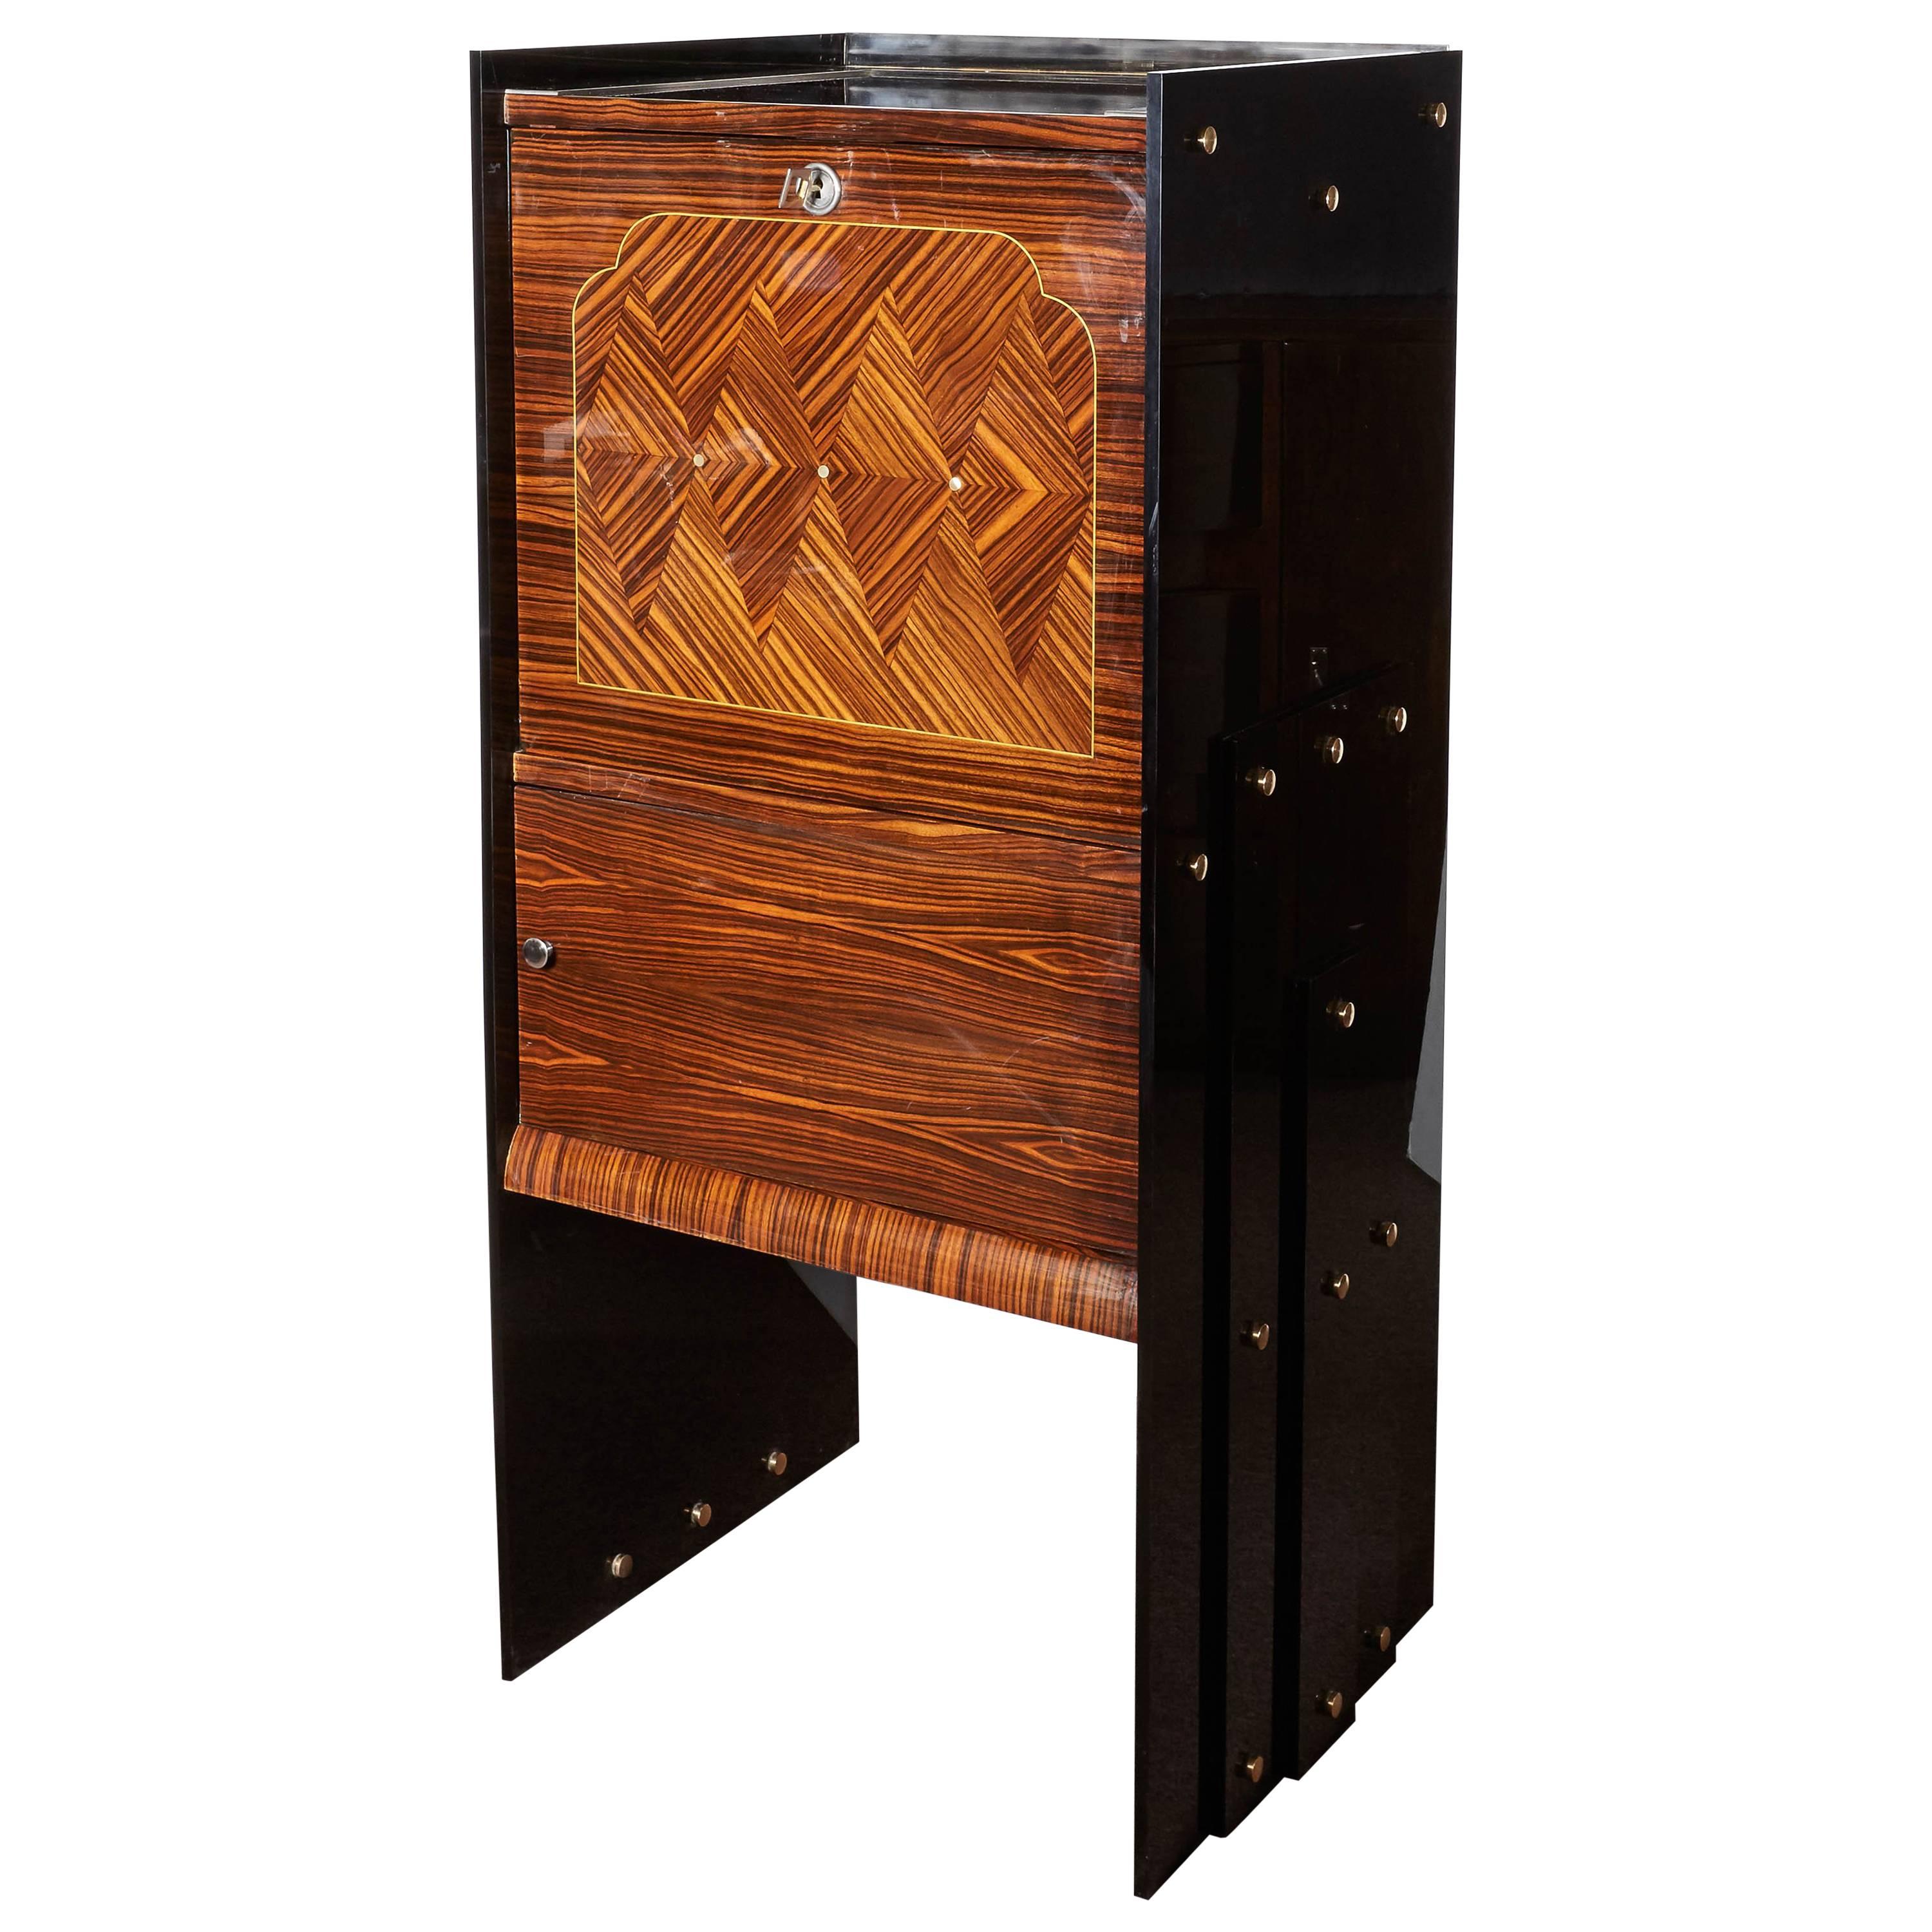 French Modernist Macassar Ebony, Plexi, Mother-of-Pearl Secretaire or Cabinet